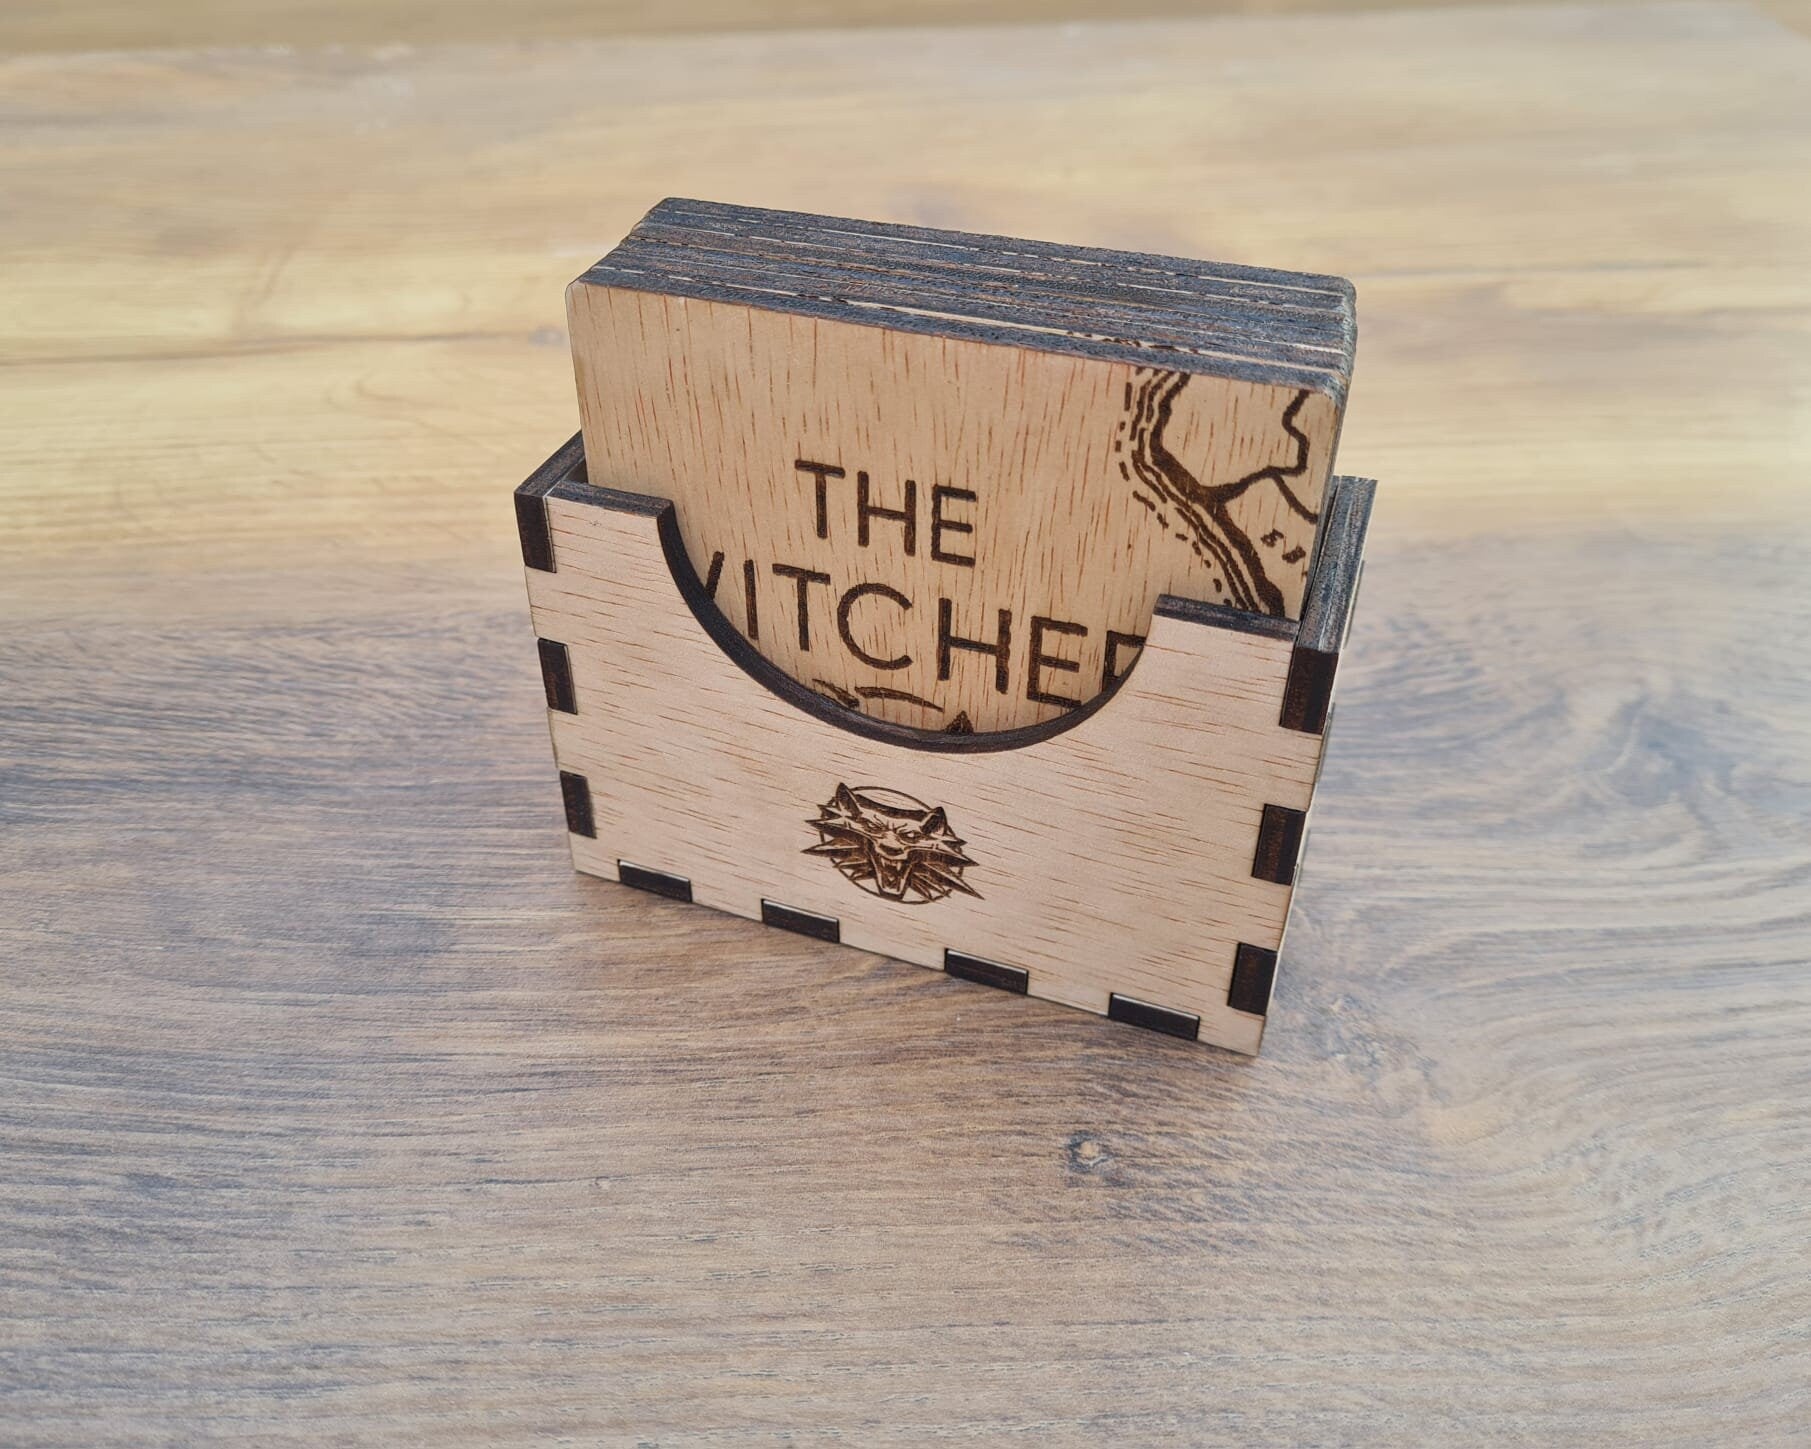 The Witcher Inspired Coasters set of 6 - Witcher Fan Gift - Home Decor - Present - Housewarming Gift - Geralt of Rivia, Gift Ideas